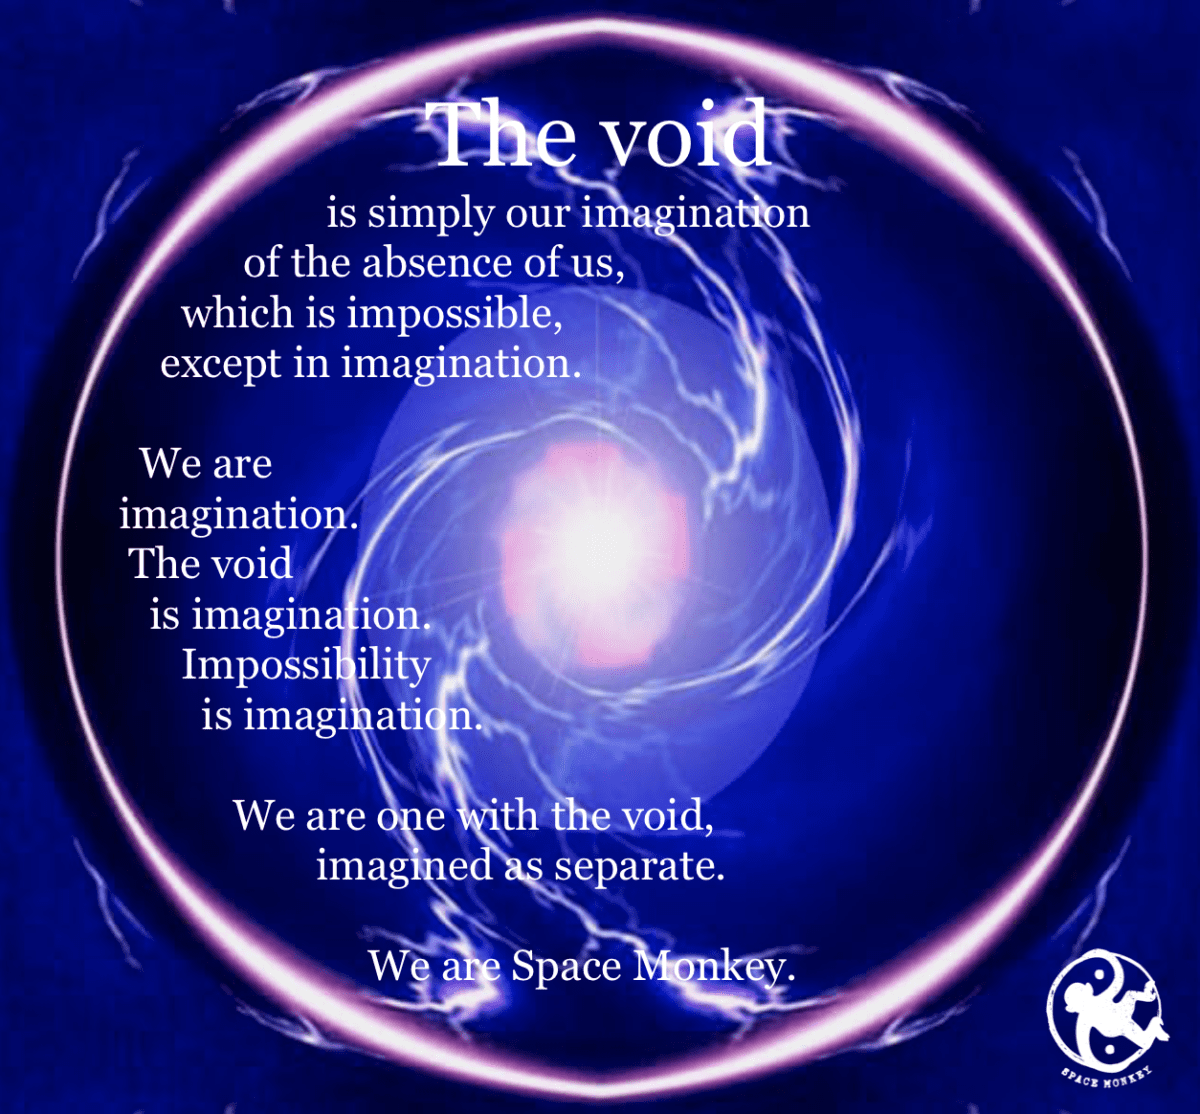               The void is simply our imagination of the absence of us, which is impossible, except in imagination.    We are  imagination. The void is imagination. Impossibility is imagination. We are one with the void,                    imagined as separate. We are Space Monkey.